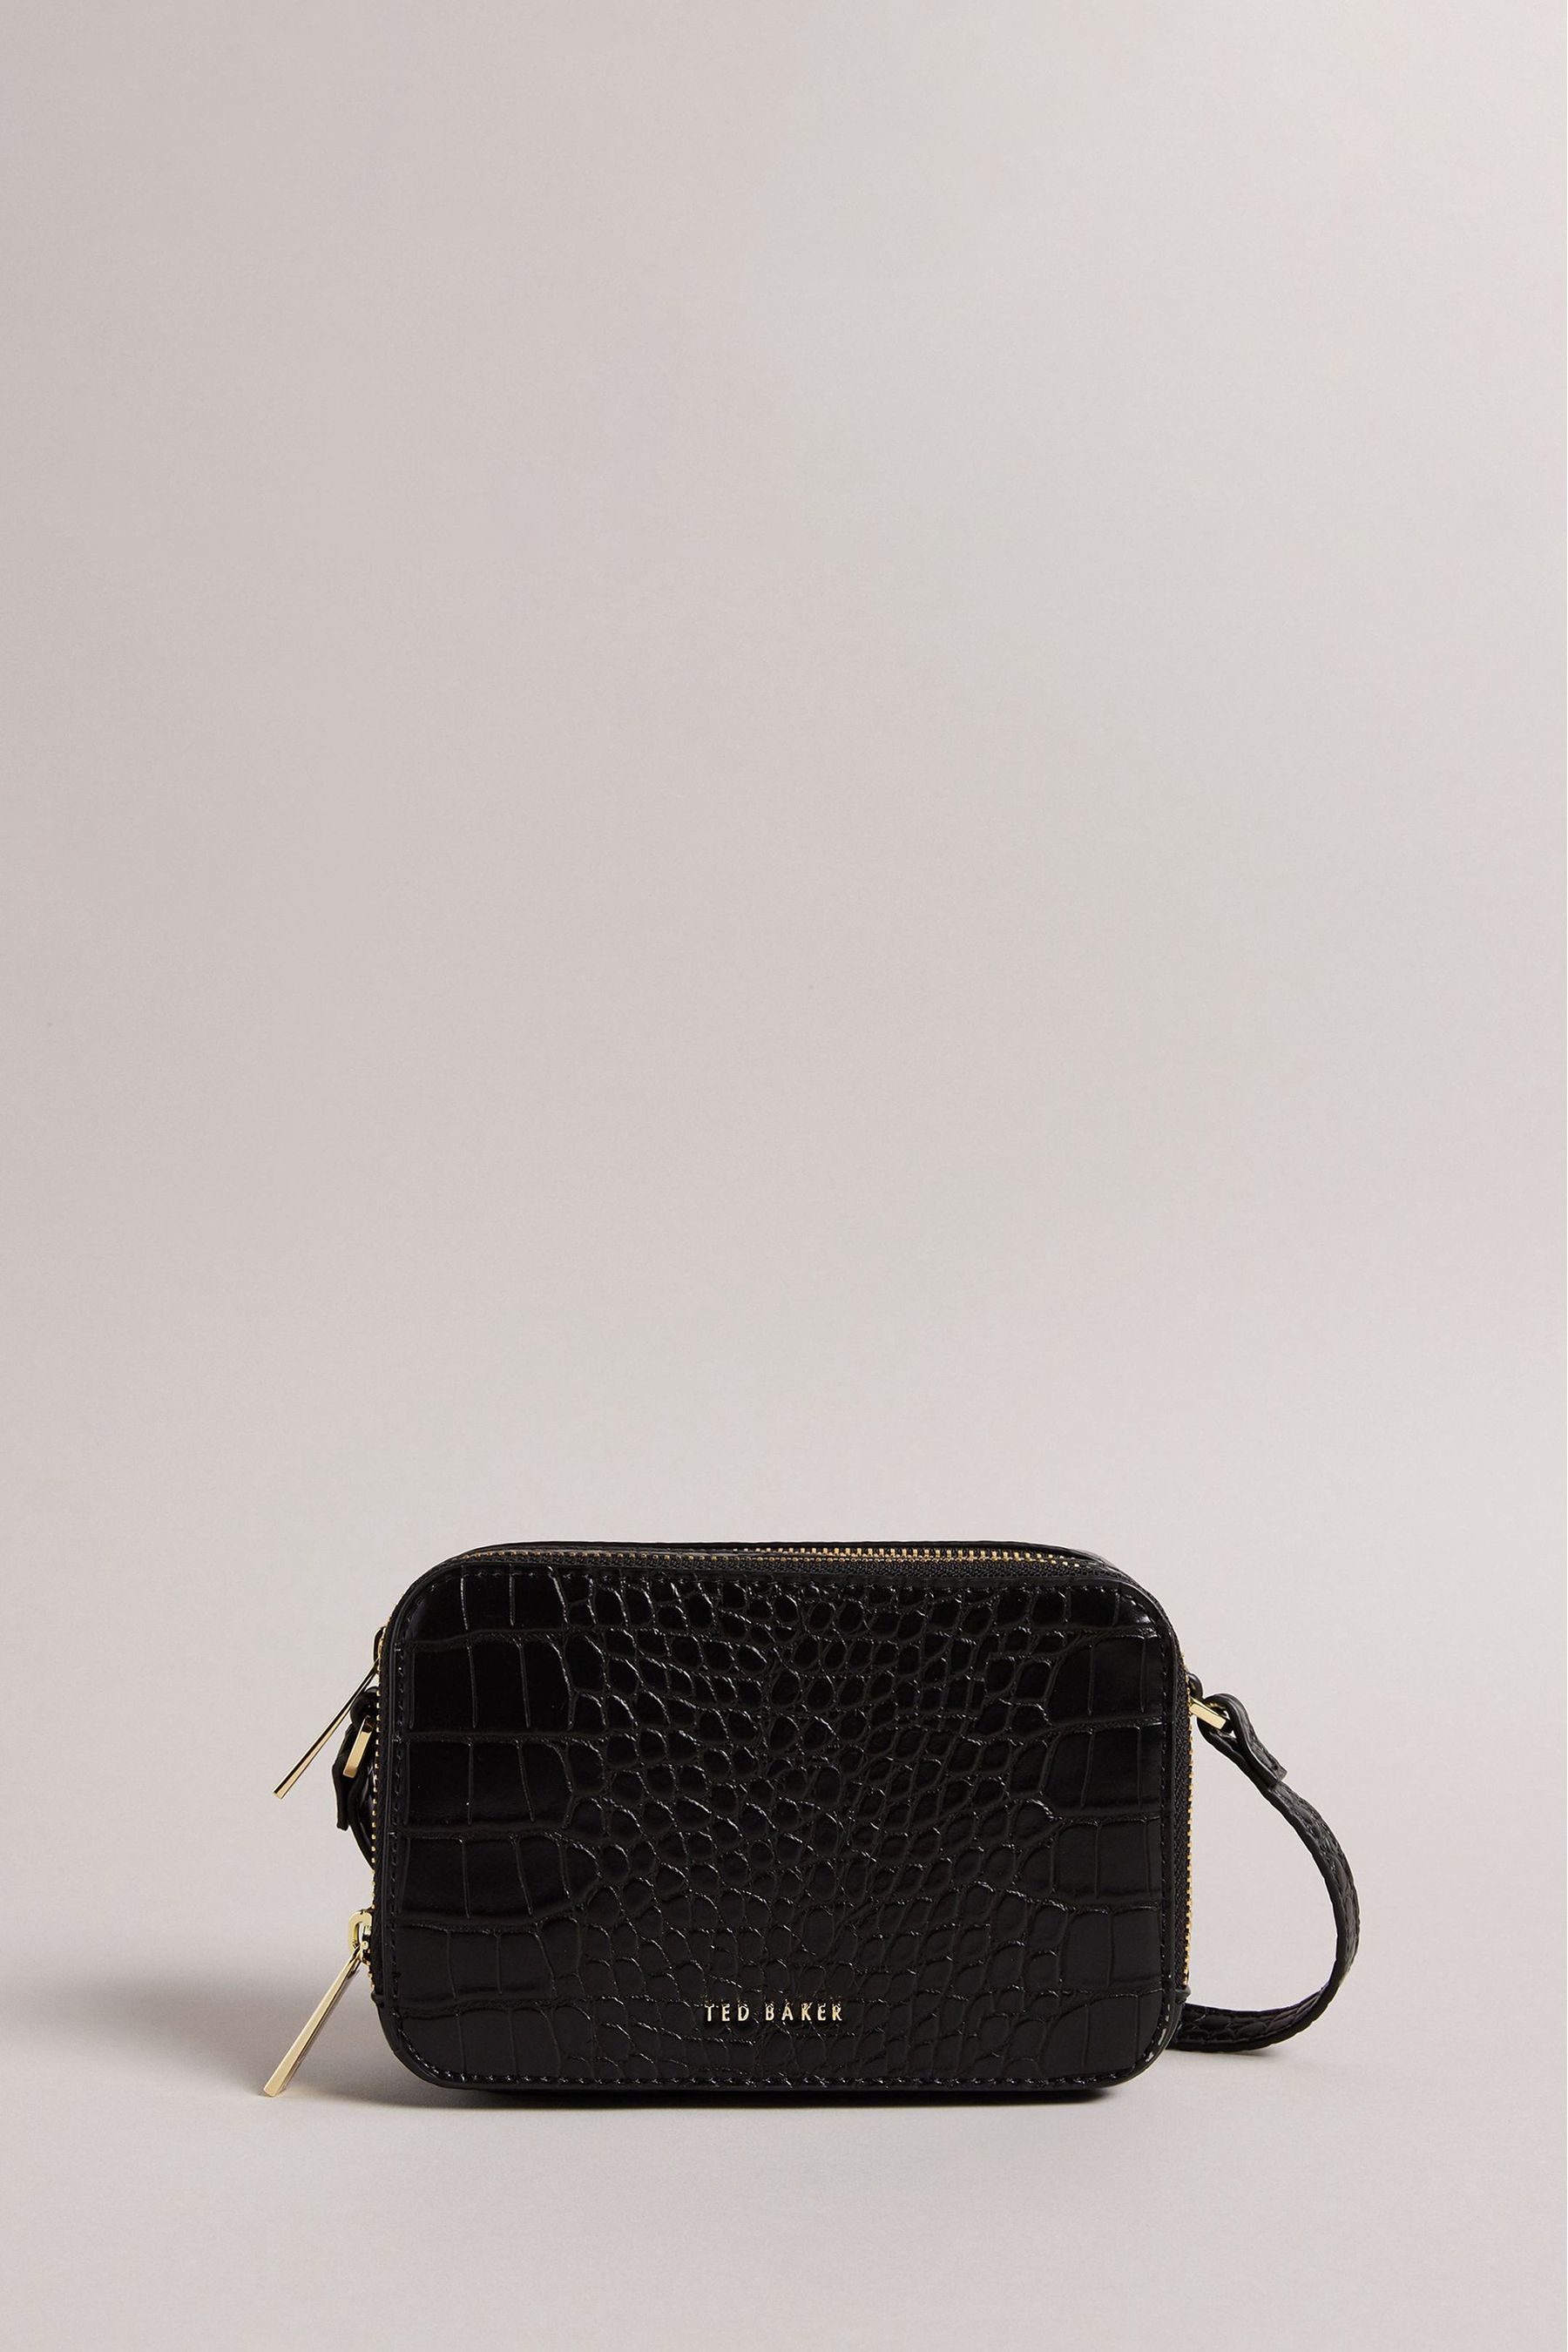 Buy Ted Baker Stina Double Zip Mini Camera Bag from the Next UK online shop